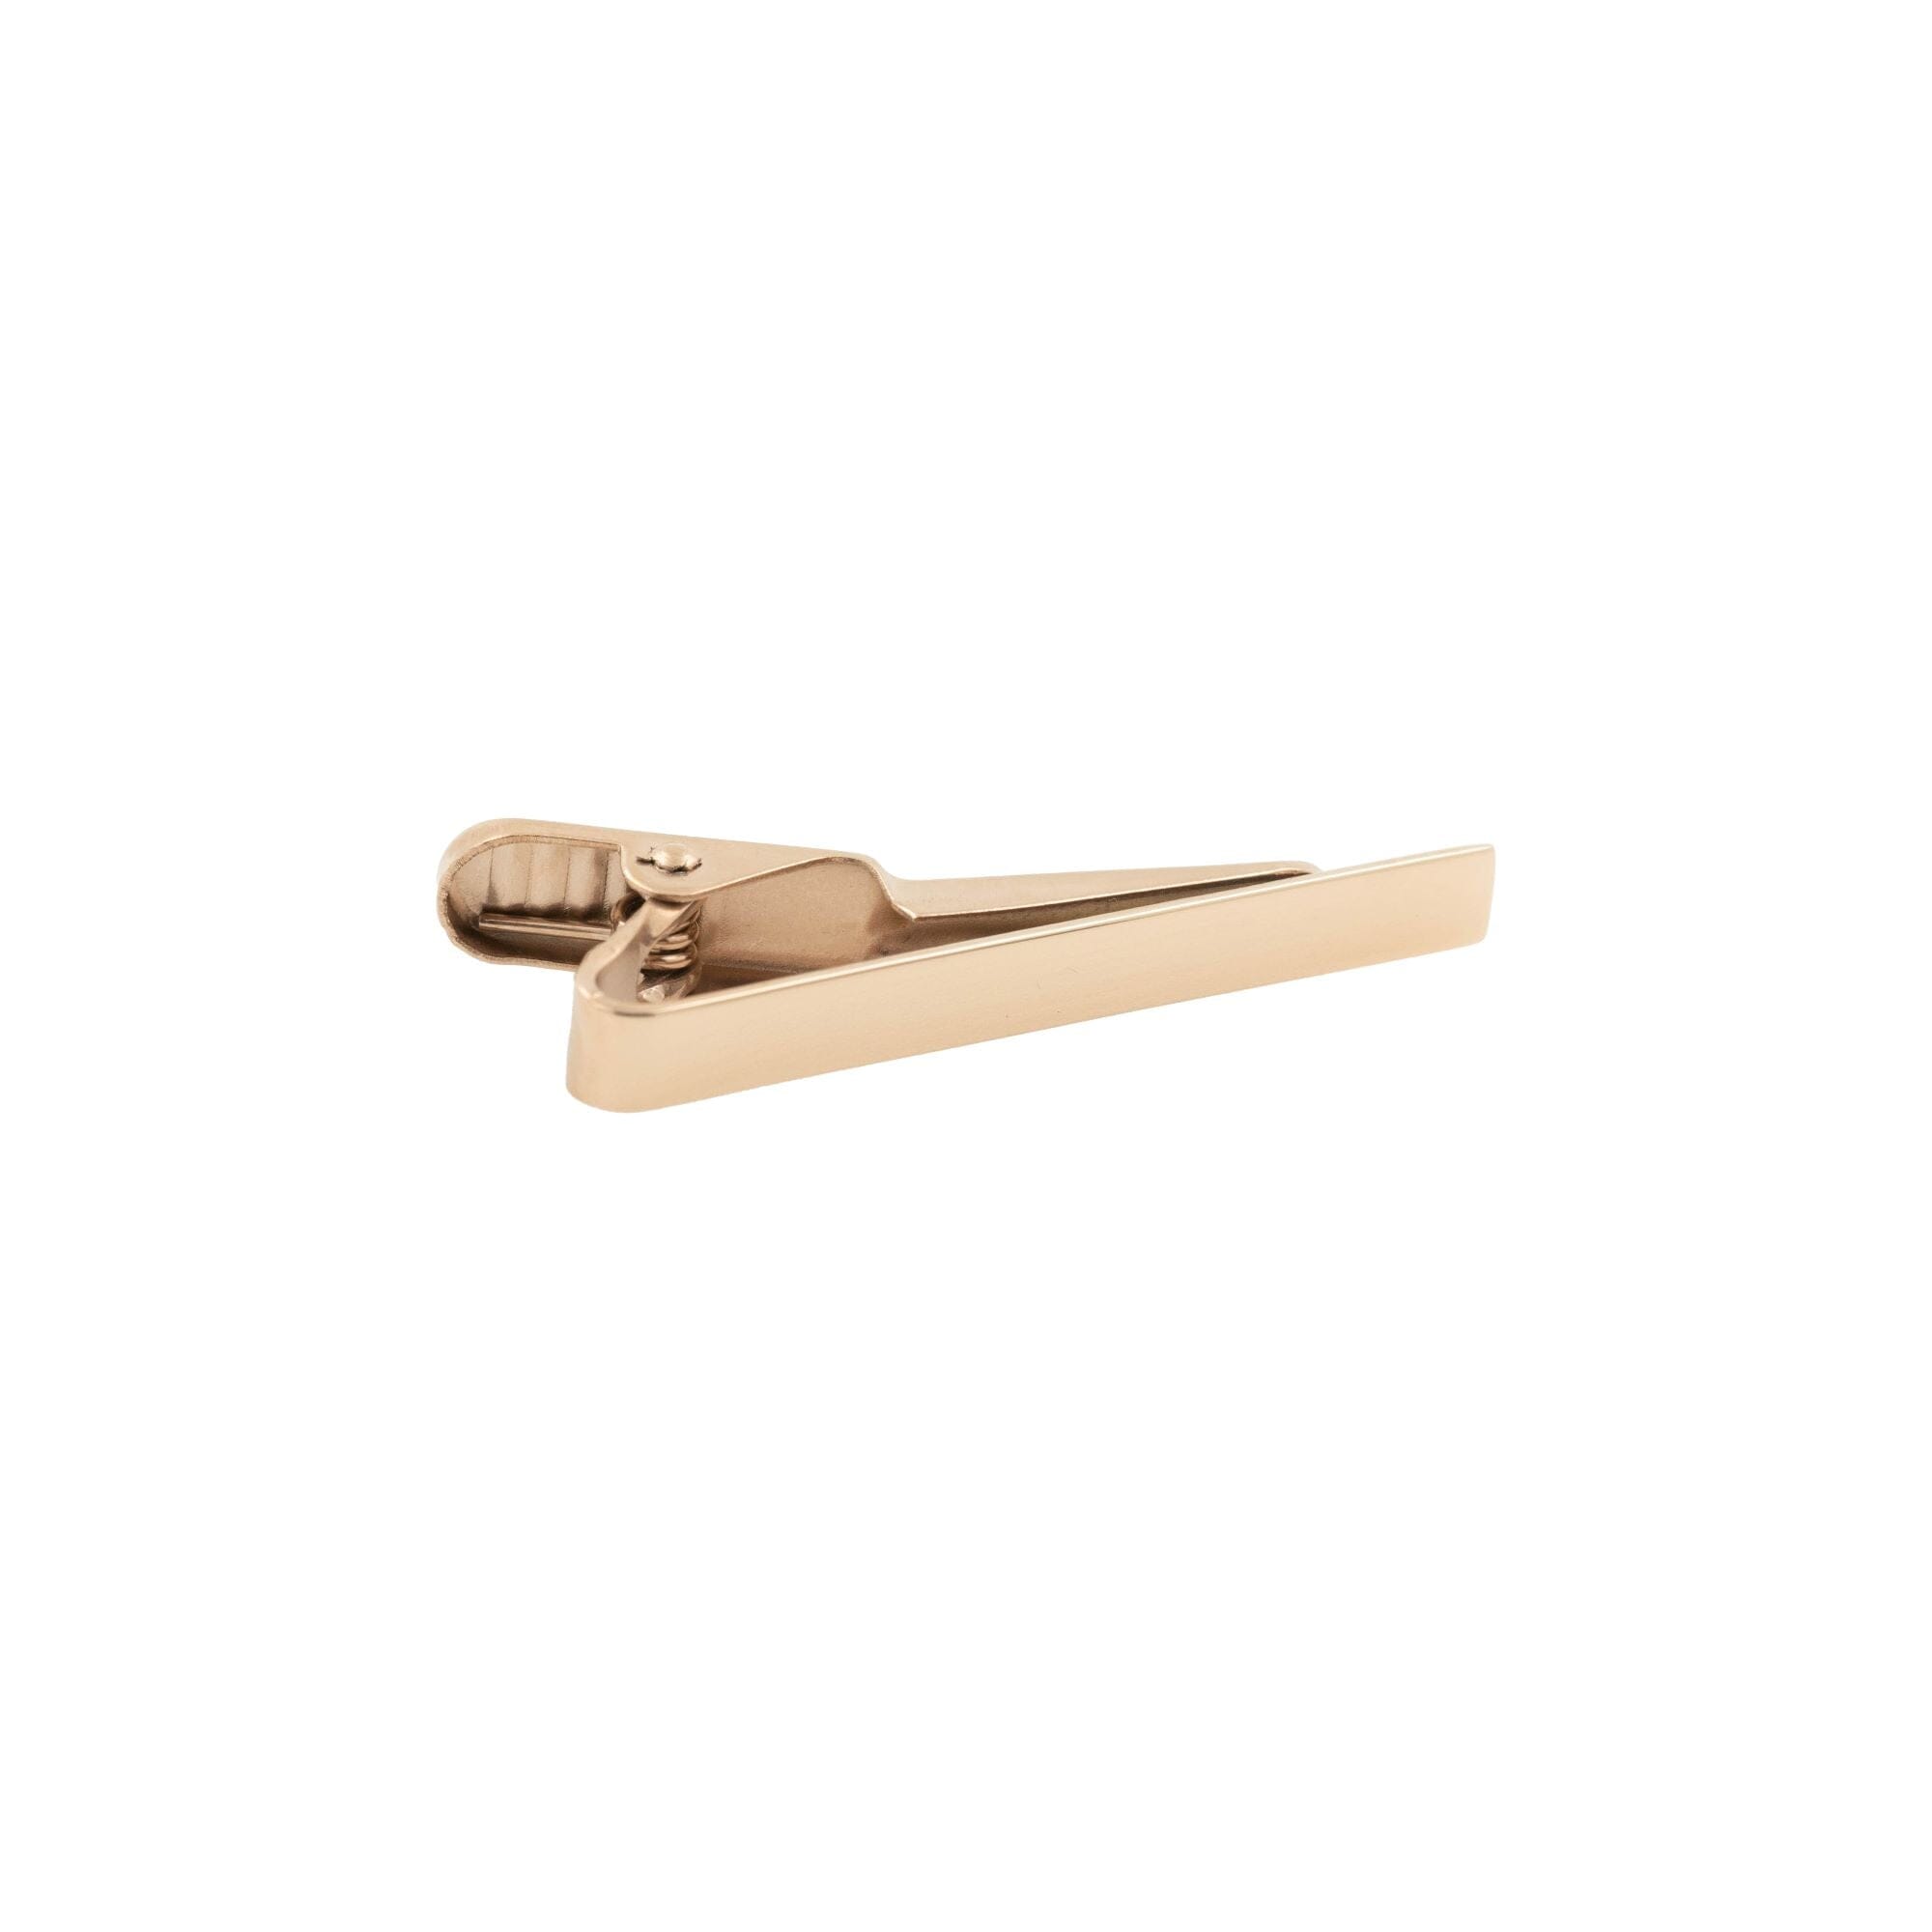 Small Shiny Rose Gold Tie Clip 40mm Tie Clips Clinks 